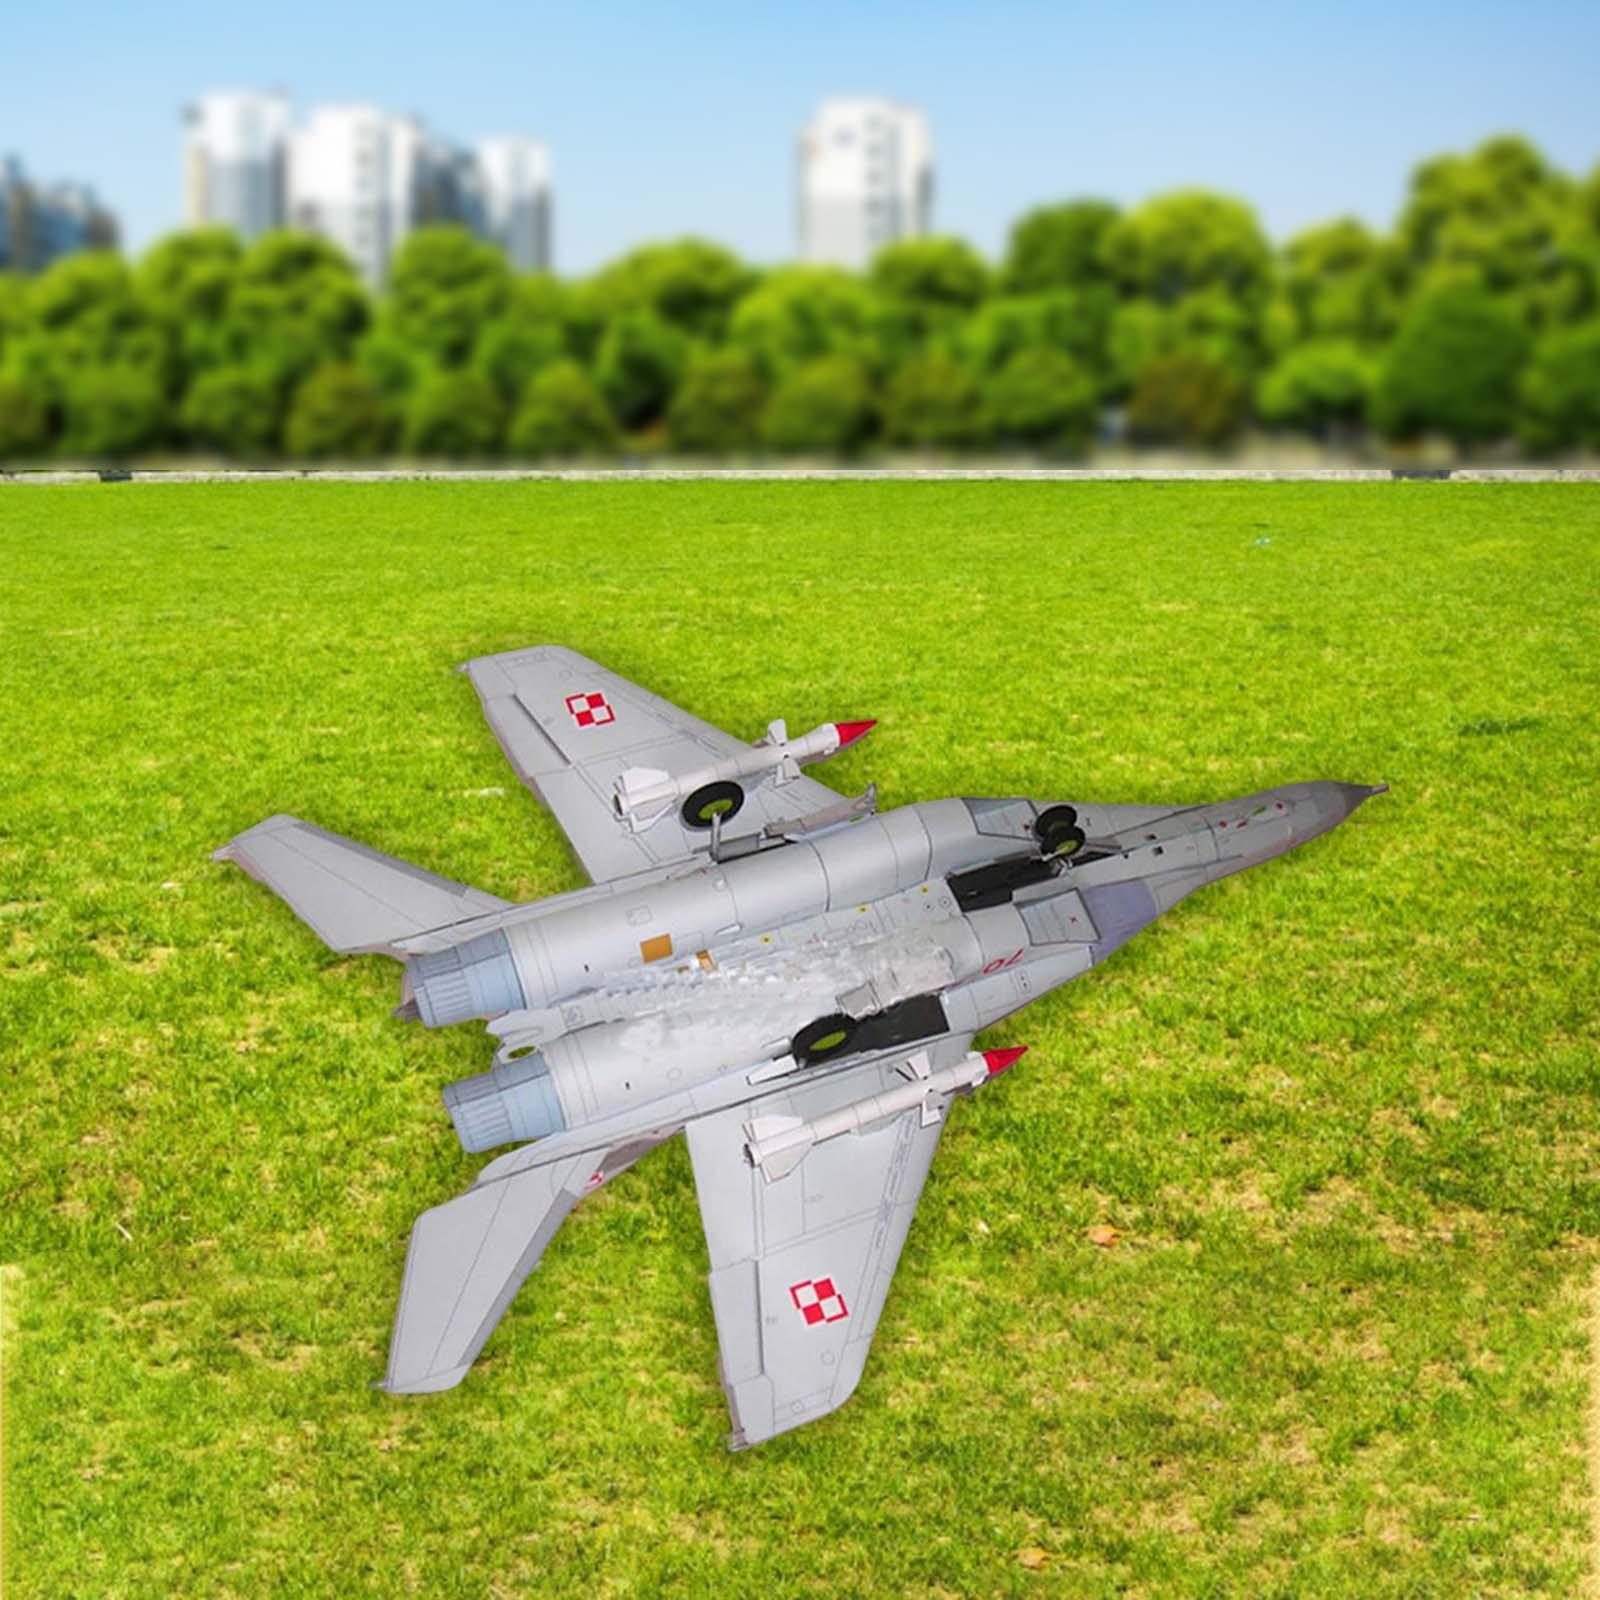 Paper Russian Plane Model Collectables Ornaments DIY Fighter Model Display Ornaments for Home Shelf Gift